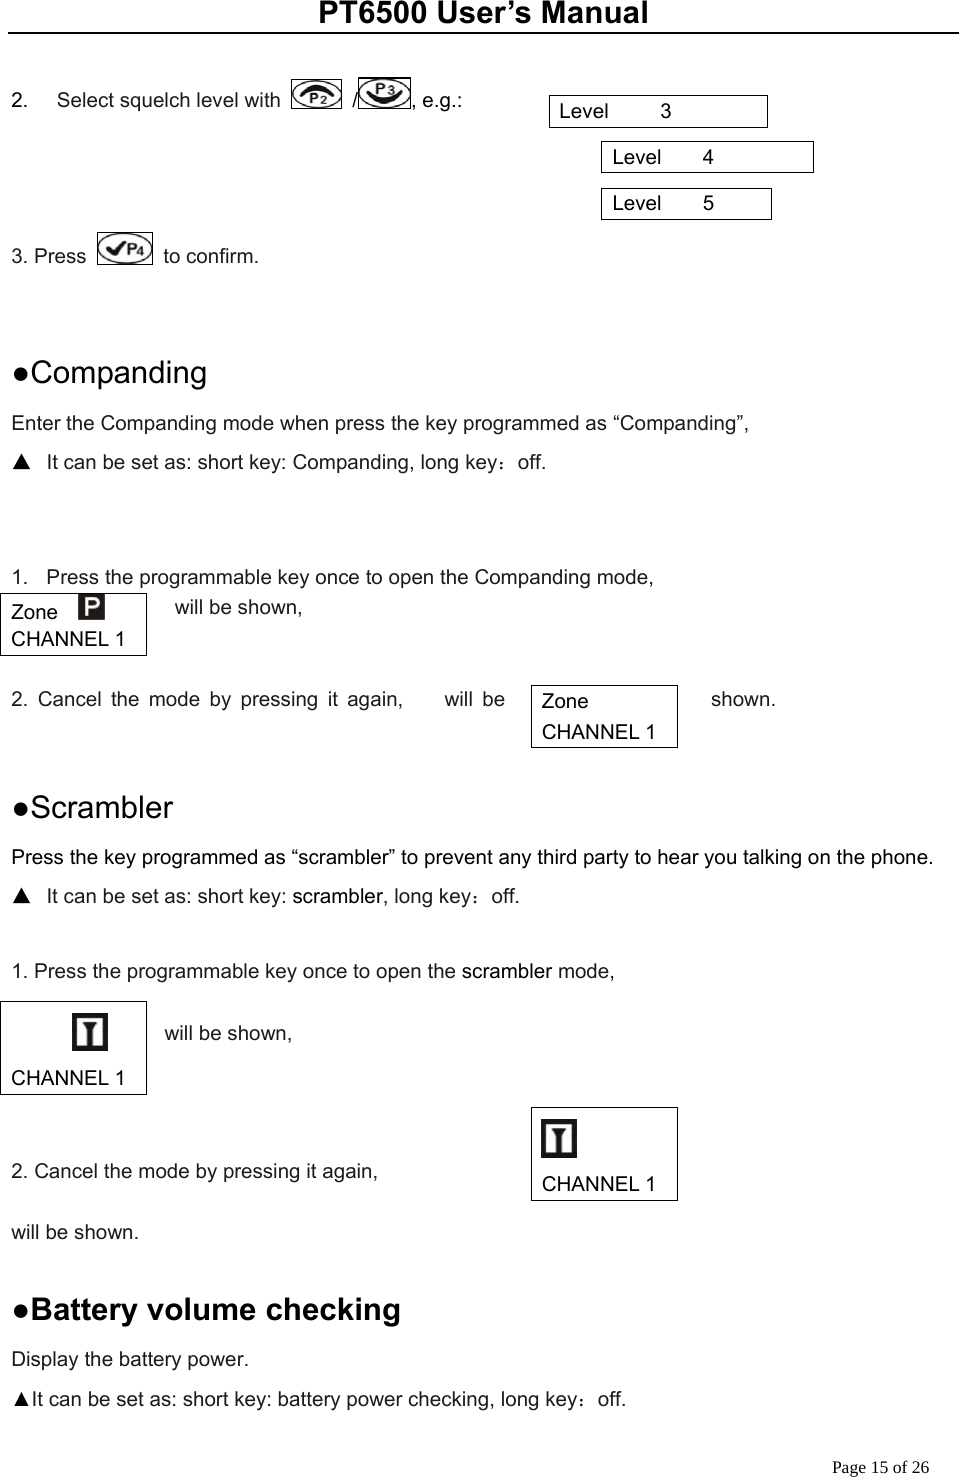 PT6500 User’s Manual Page 15 of 26  2.    Select squelch level with   / , e.g.:                                                                                        3. Press   to confirm.   ●Companding Enter the Companding mode when press the key programmed as “Companding”,   ▲  It can be set as: short key: Companding, long key：off.   1.  Press the programmable key once to open the Companding mode,           will be shown,   2. Cancel the mode by pressing it again,    will be  shown.        ●Scrambler Press the key programmed as “scrambler” to prevent any third party to hear you talking on the phone. ▲  It can be set as: short key: scrambler, long key：off.  1. Press the programmable key once to open the scrambler mode,      will be shown,    2. Cancel the mode by pressing it again,    will be shown.      ●Battery volume checking Display the battery power. ▲It can be set as: short key: battery power checking, long key：off. Level     3 Level    4 Level    5 Zone    CHANNEL 1 Zone   CHANNEL 1     CHANNEL 1  CHANNEL 1 